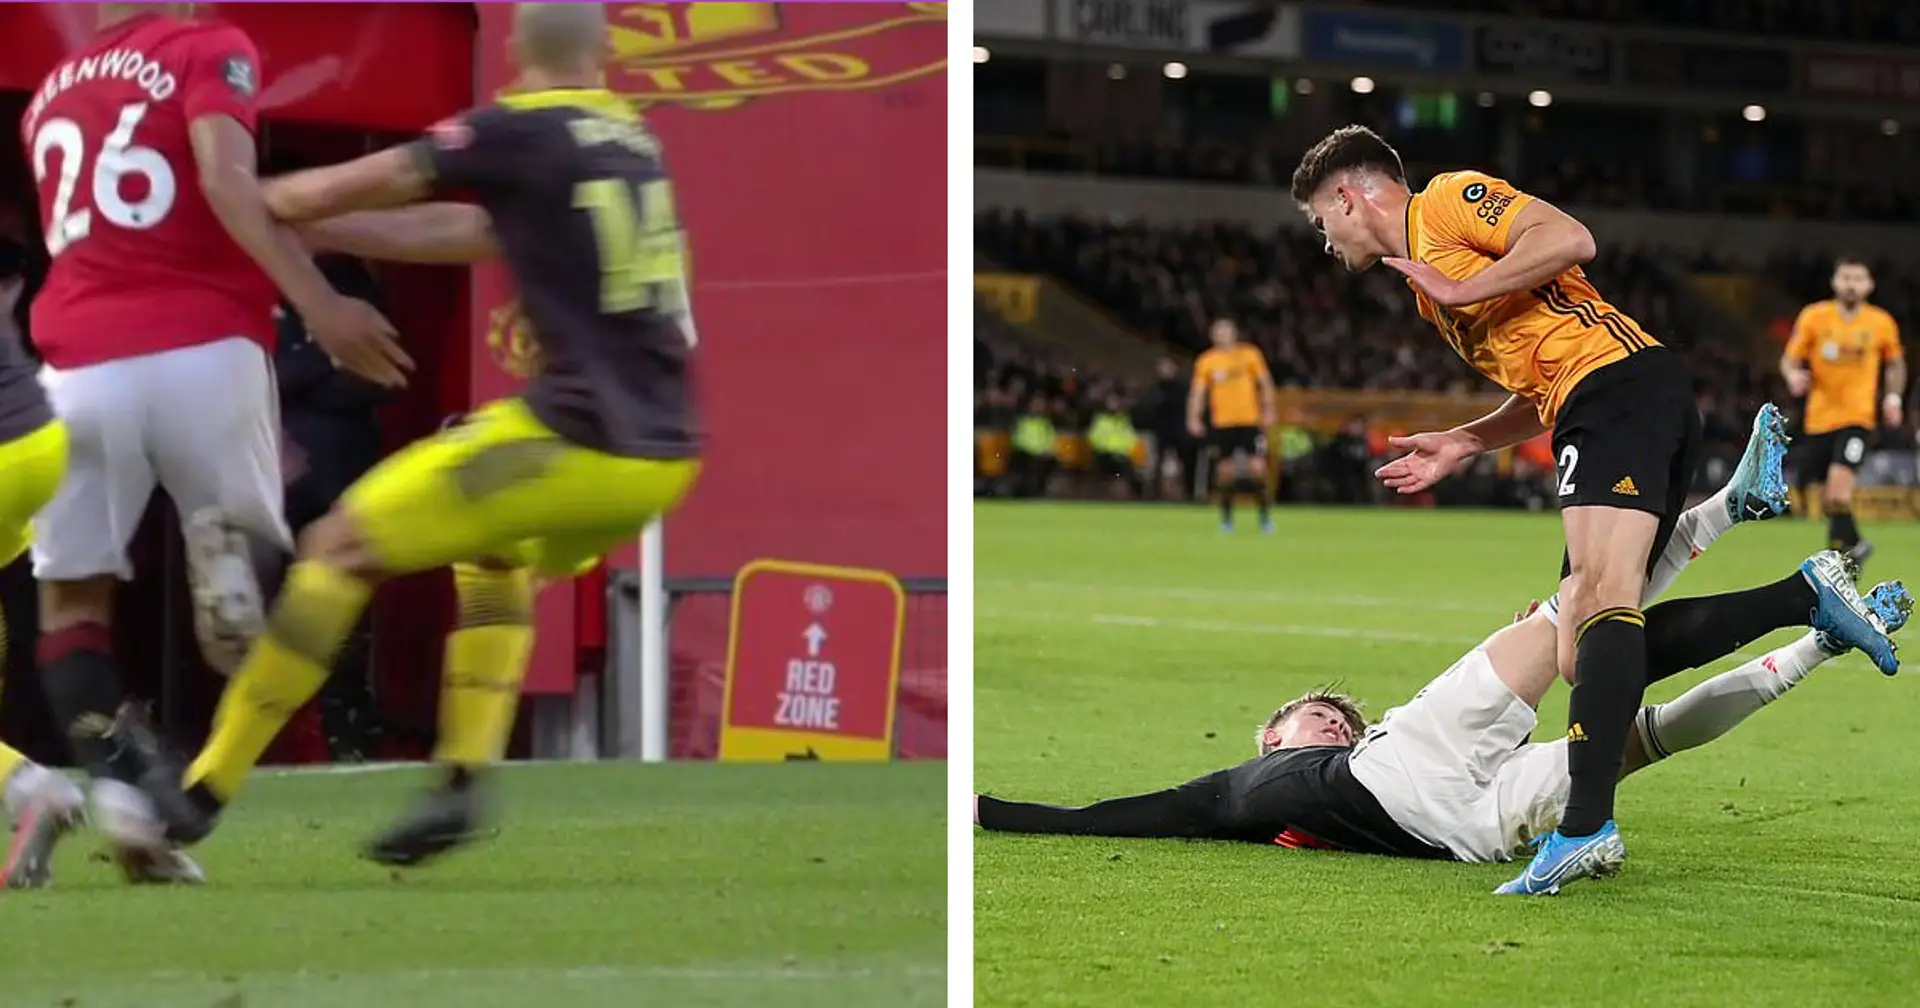 4 controversial decisions that went against United this season - even as others complain about VAR favouring us